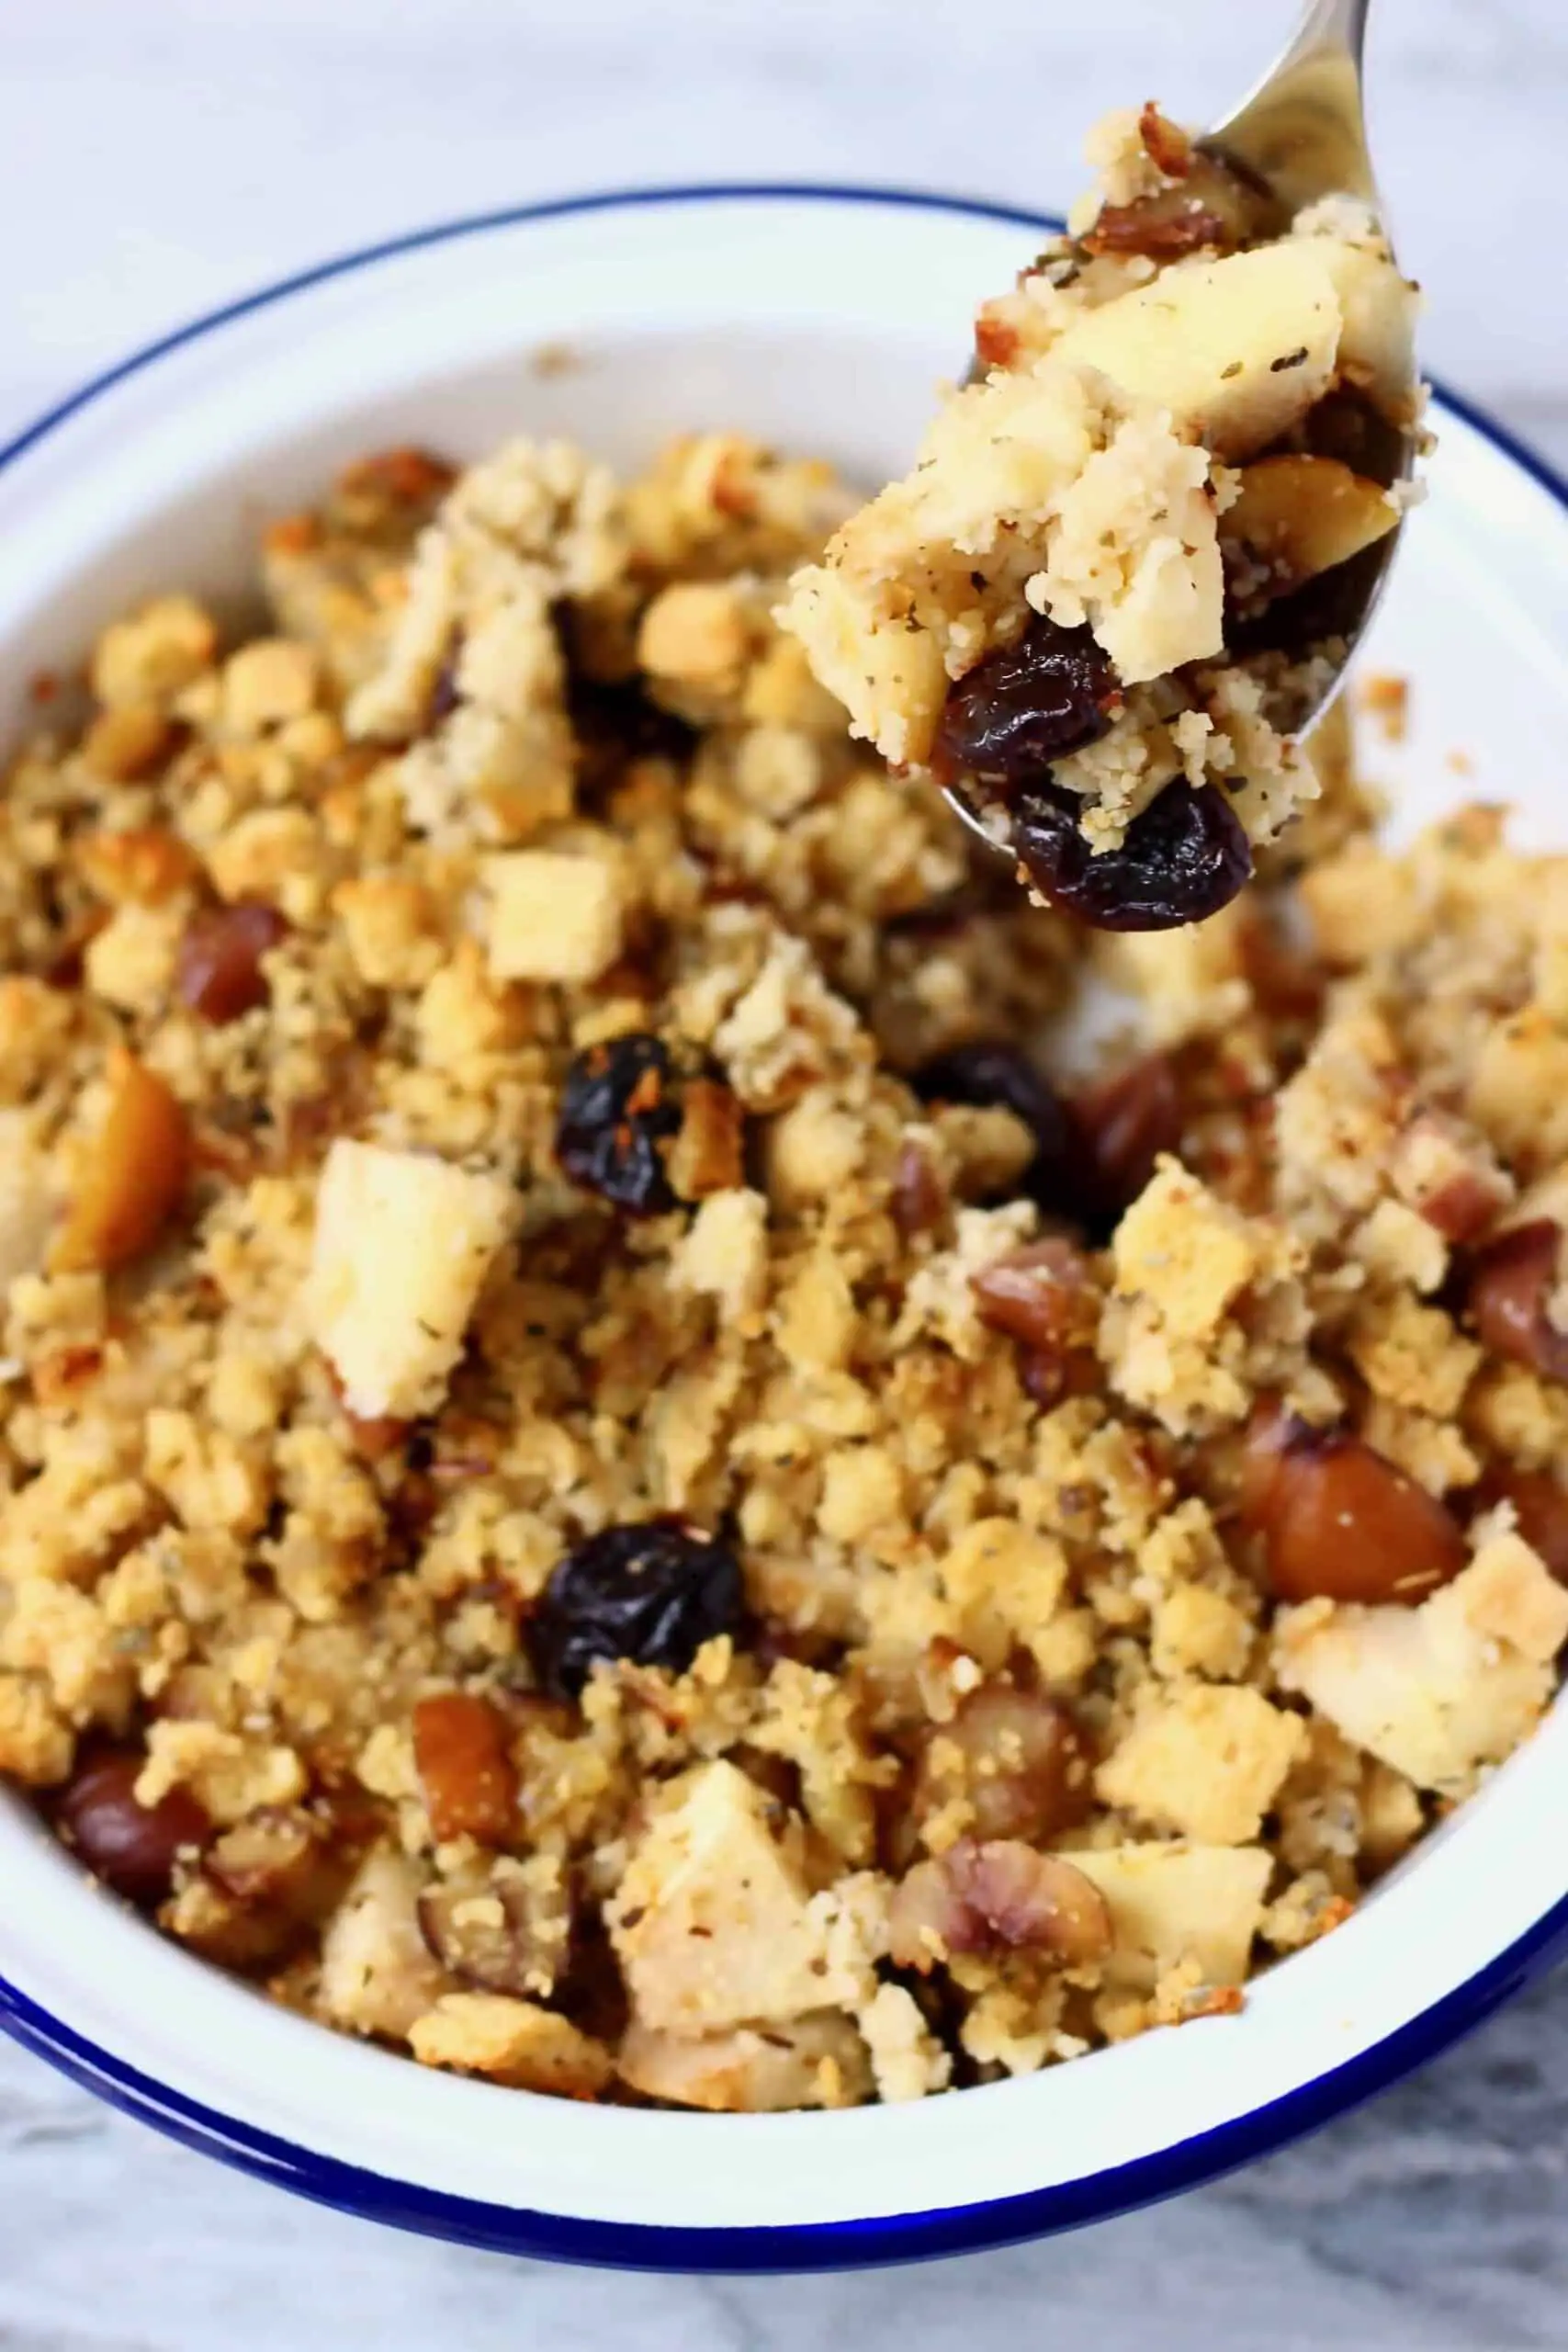 Gluten-free vegan stuffing with chestnuts, apple and dried cherries in a pie dish with a spoon holding up a mouthful